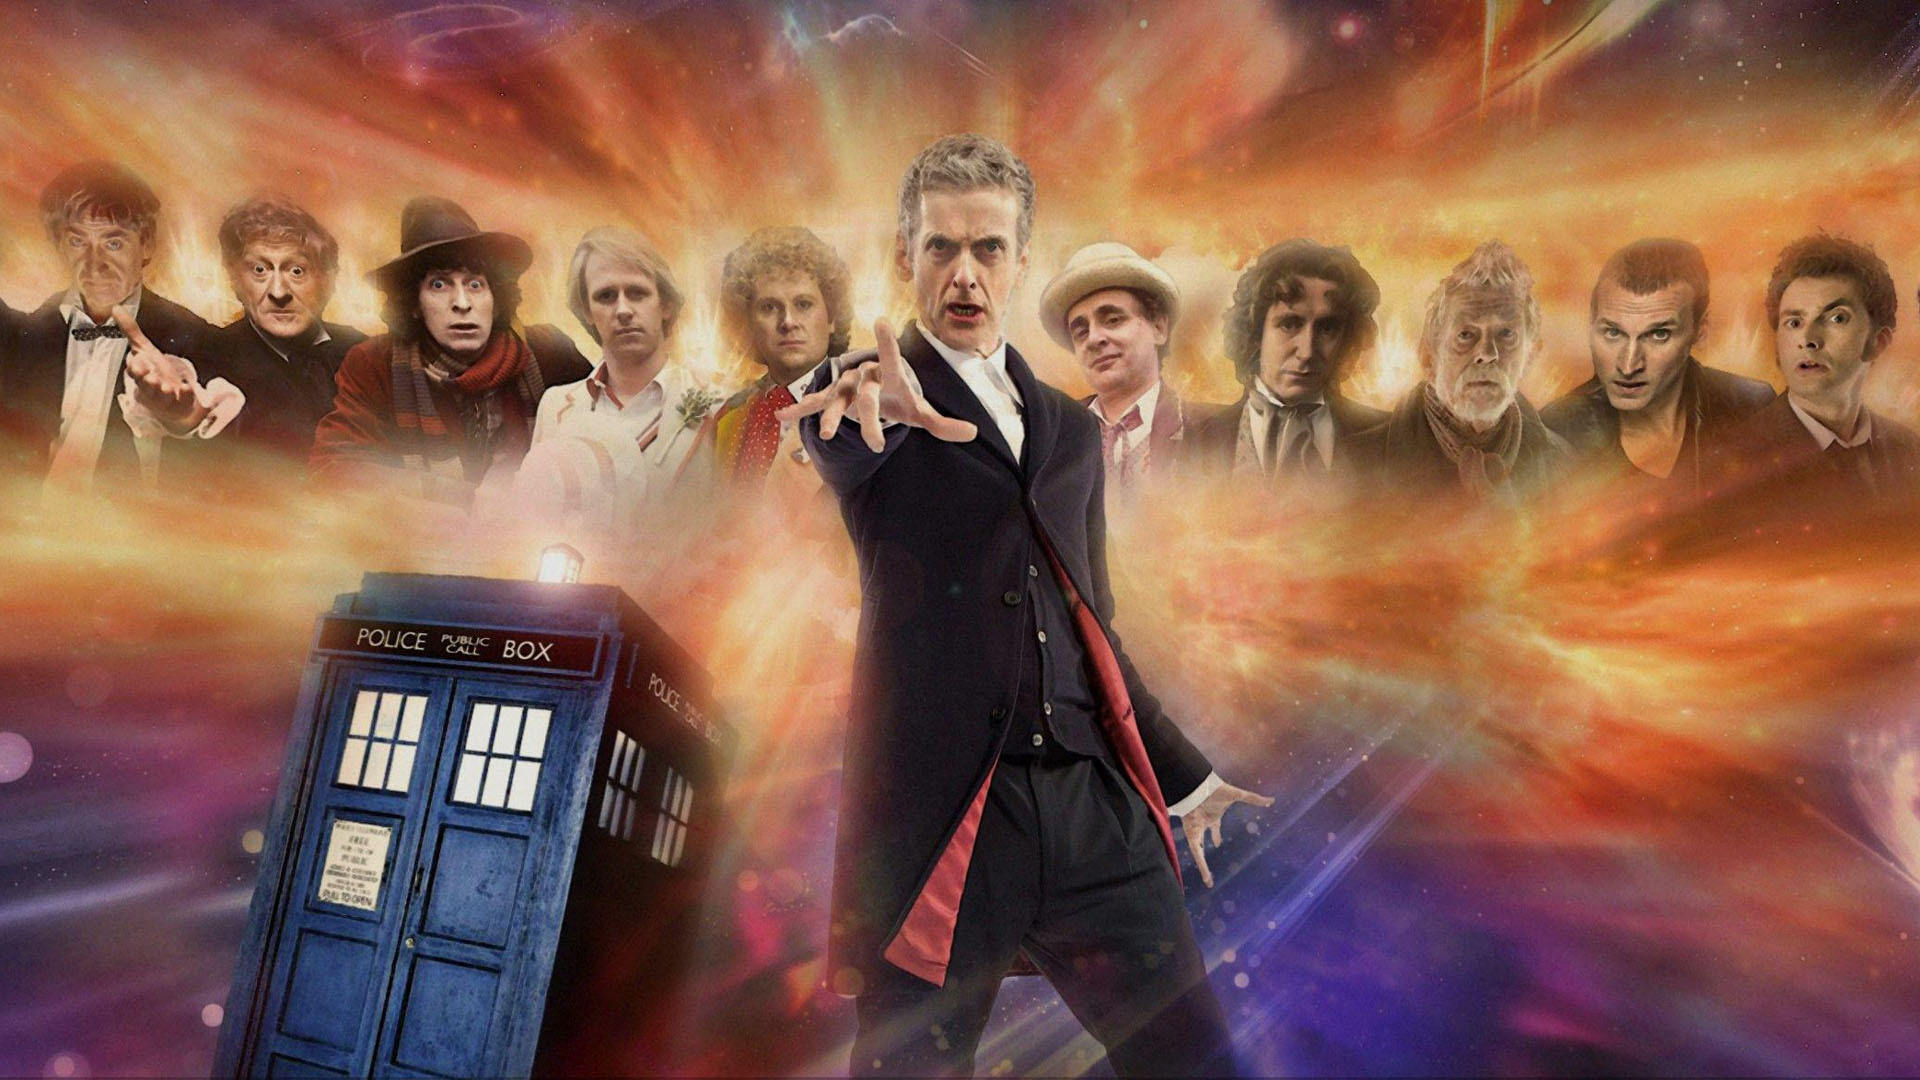 doctor who specials postwer